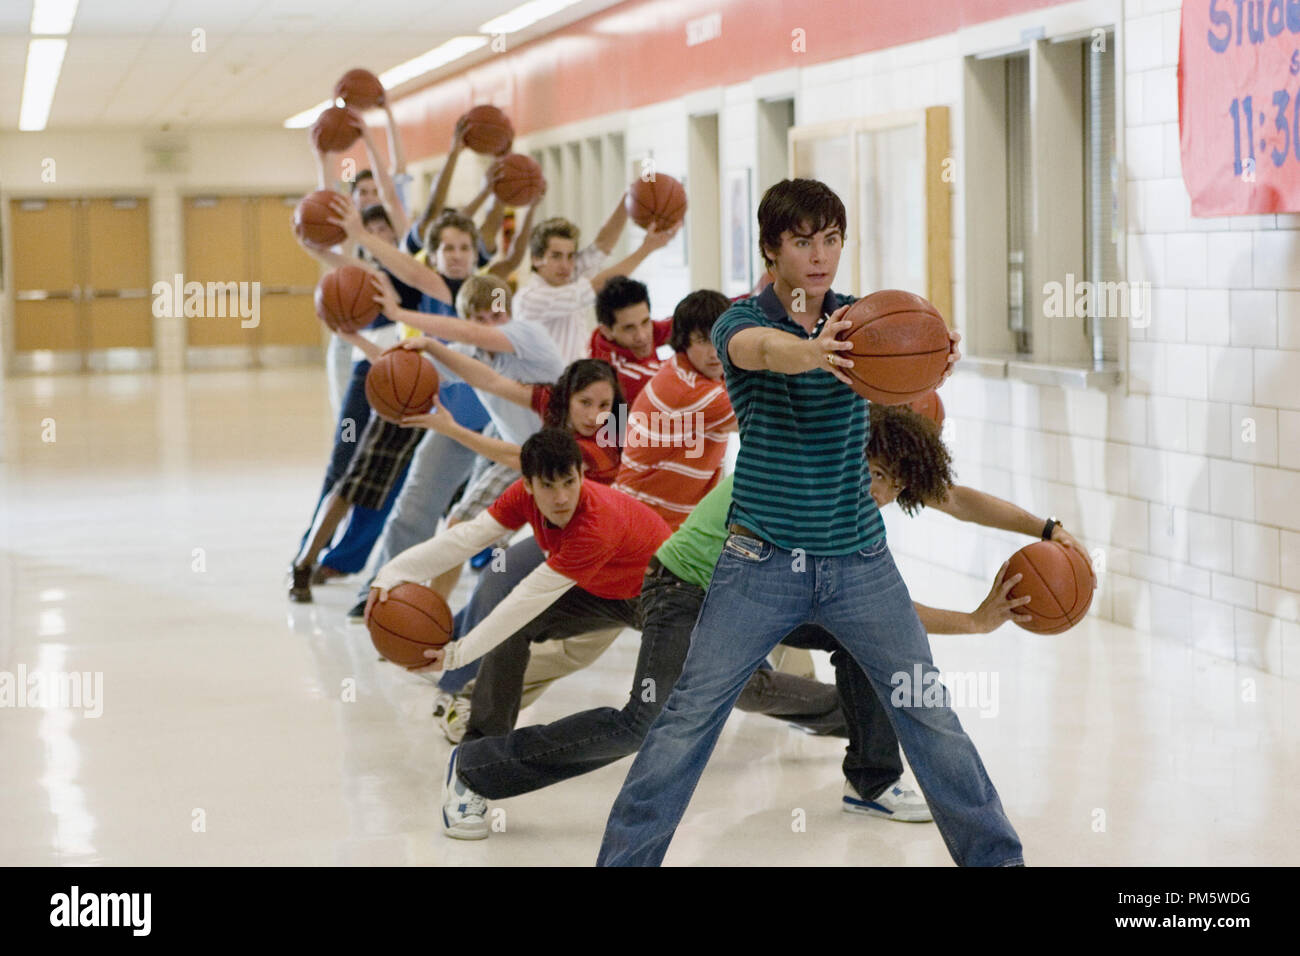 Studio Publicity Still from 'High School Musical 2' Zac Efron, Corbin Bleu, Charles Klapow, Ryne Sanborn, Kimberly Klapow, Roger Malaga 2007 Photo credit: Adam Larkey   File Reference # 307381026THA  For Editorial Use Only -  All Rights Reserved Stock Photo